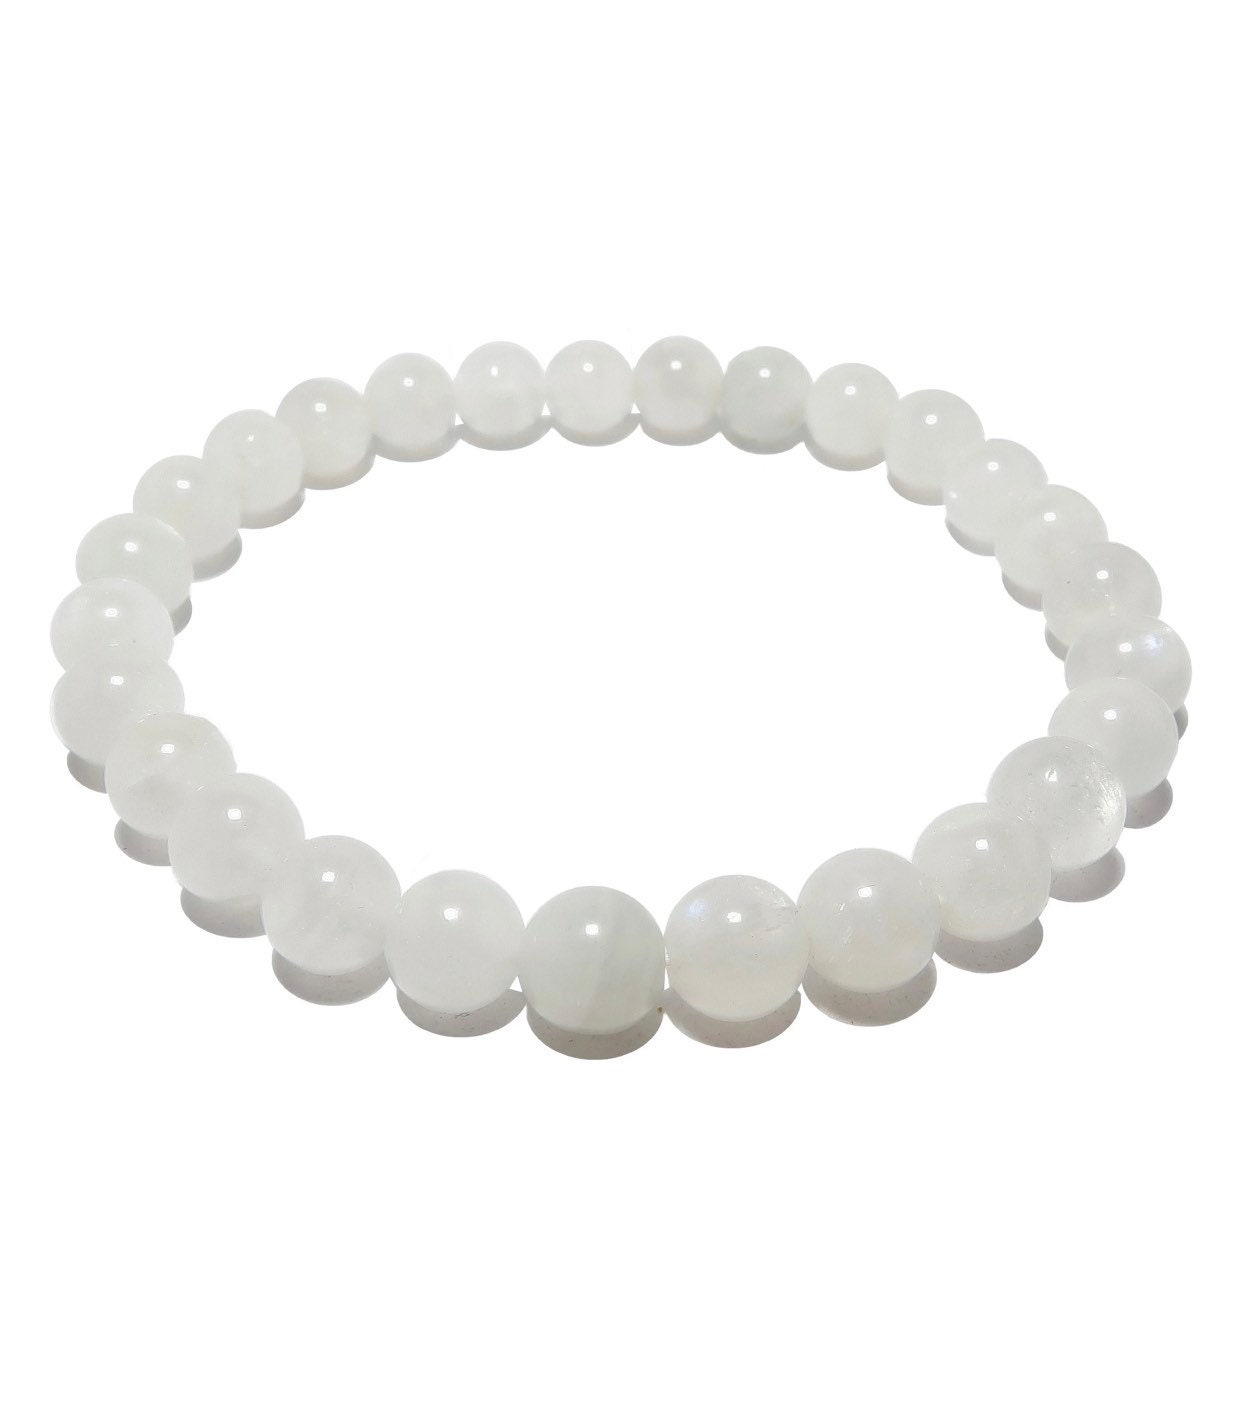 The Incredible Benefits of Wearing a Moonstone Bracelet - YouTube